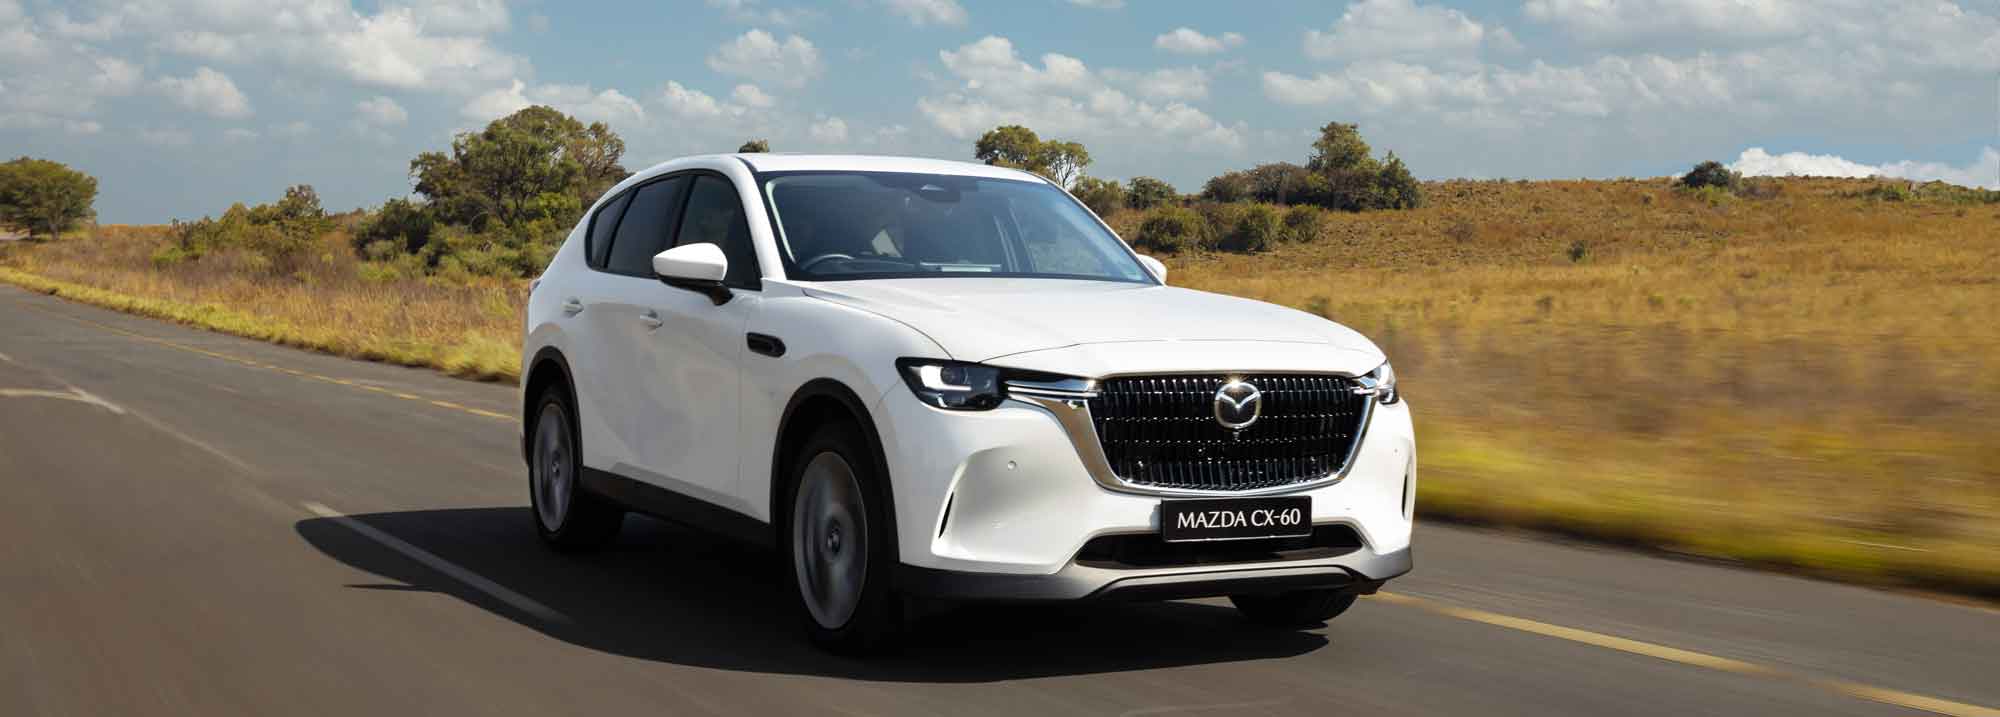 Much anticipated Mazda CX-60 goes on sale